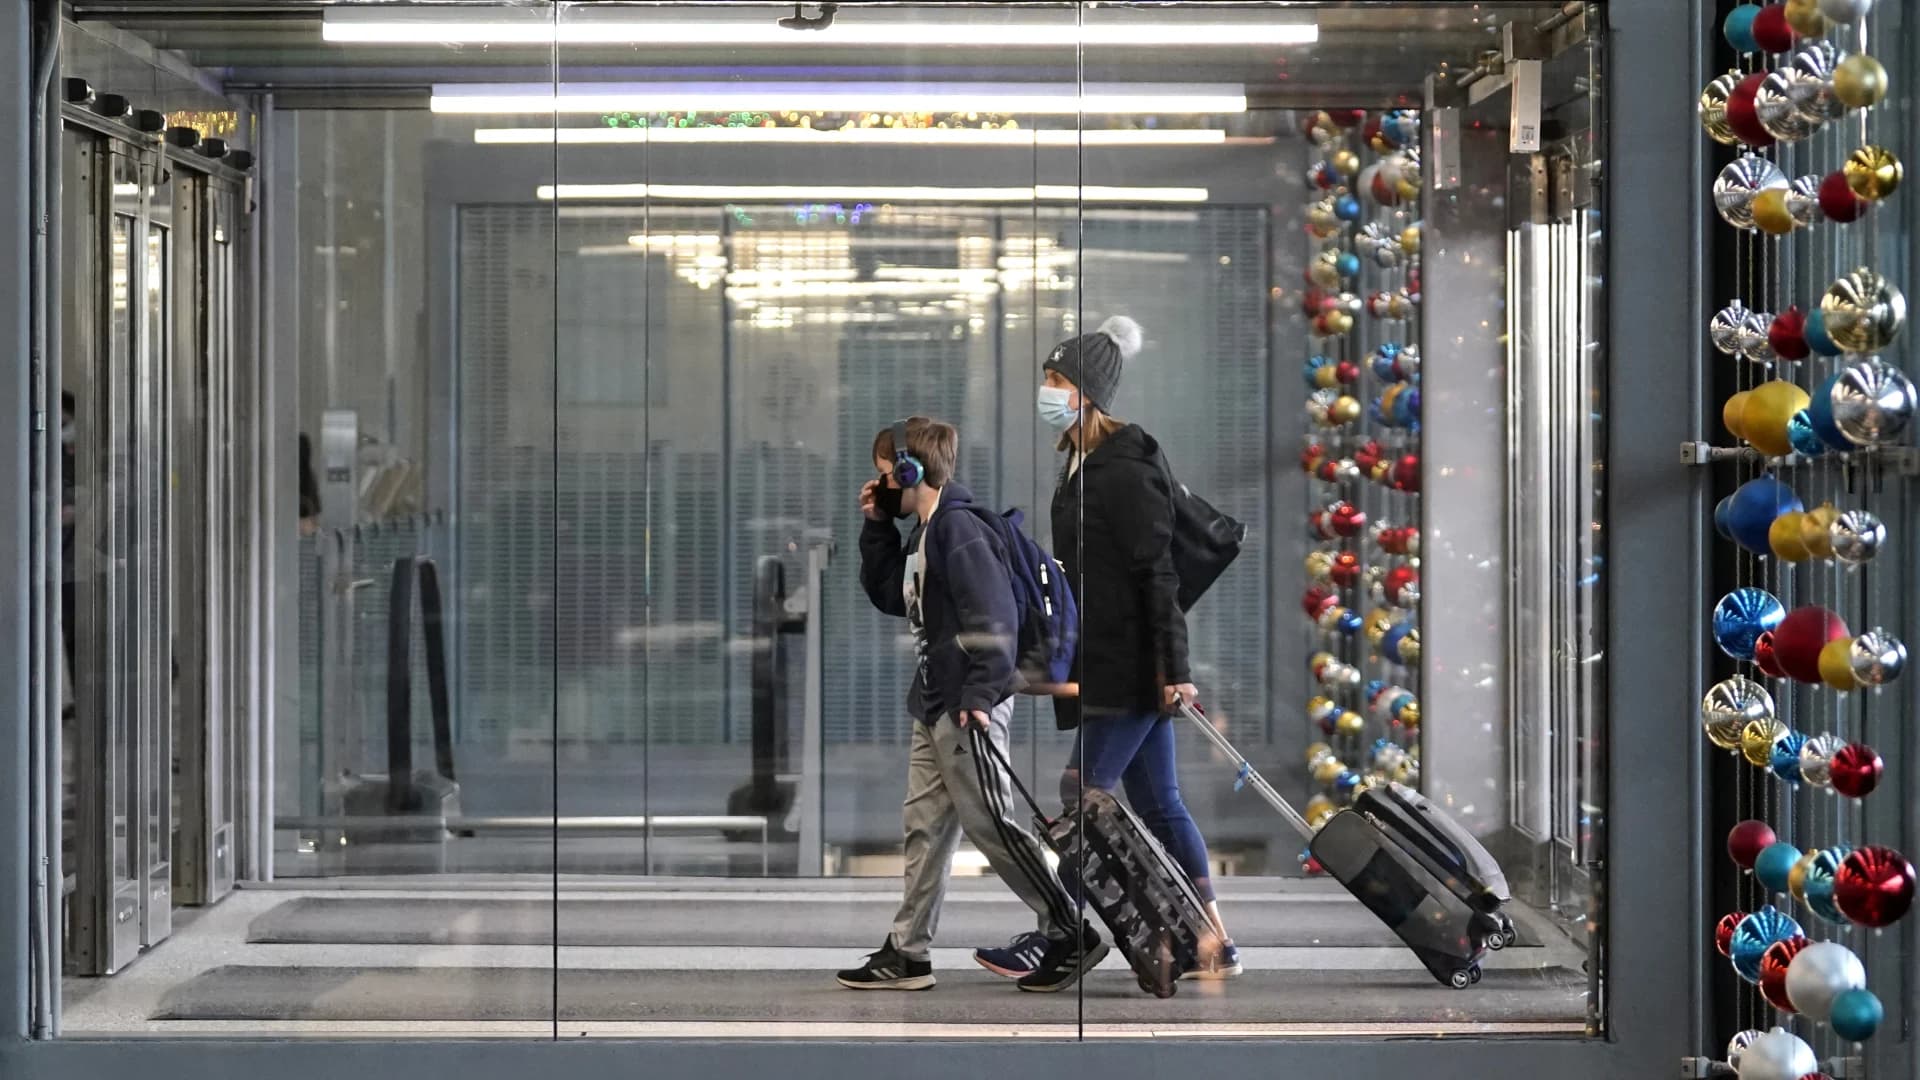 15 safety guidelines for traveling during the holidays